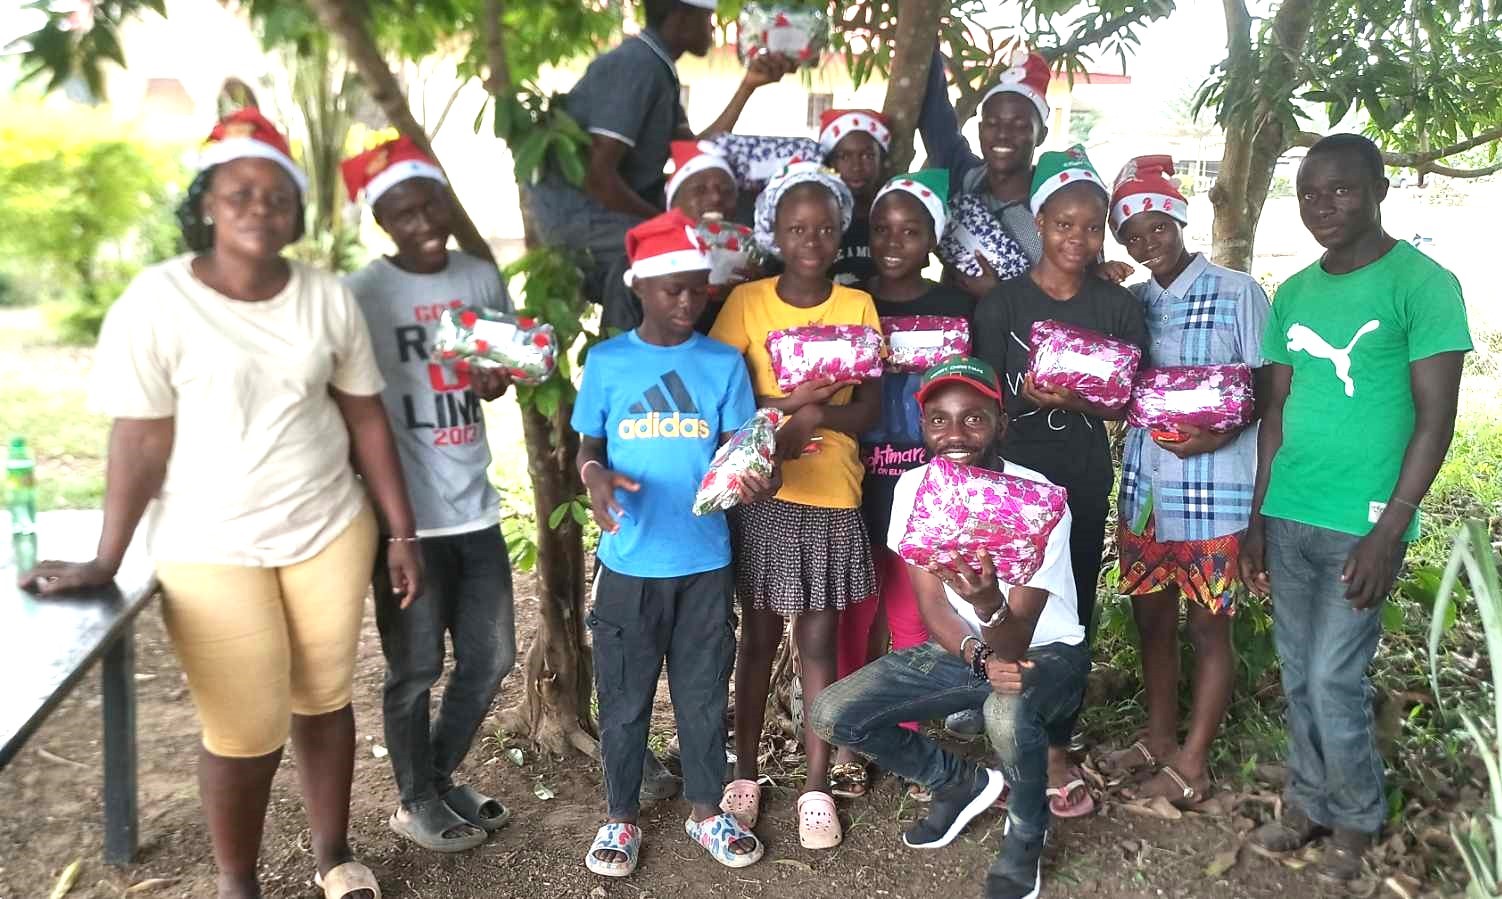 Daniel Coleman deserves all the accolades for going to Mt. Barclay each Christmas! The kids at Ma Esther's Home and at Eric and Kamah's love when he comes with candies!  John and Korpu have 11 children in their home.